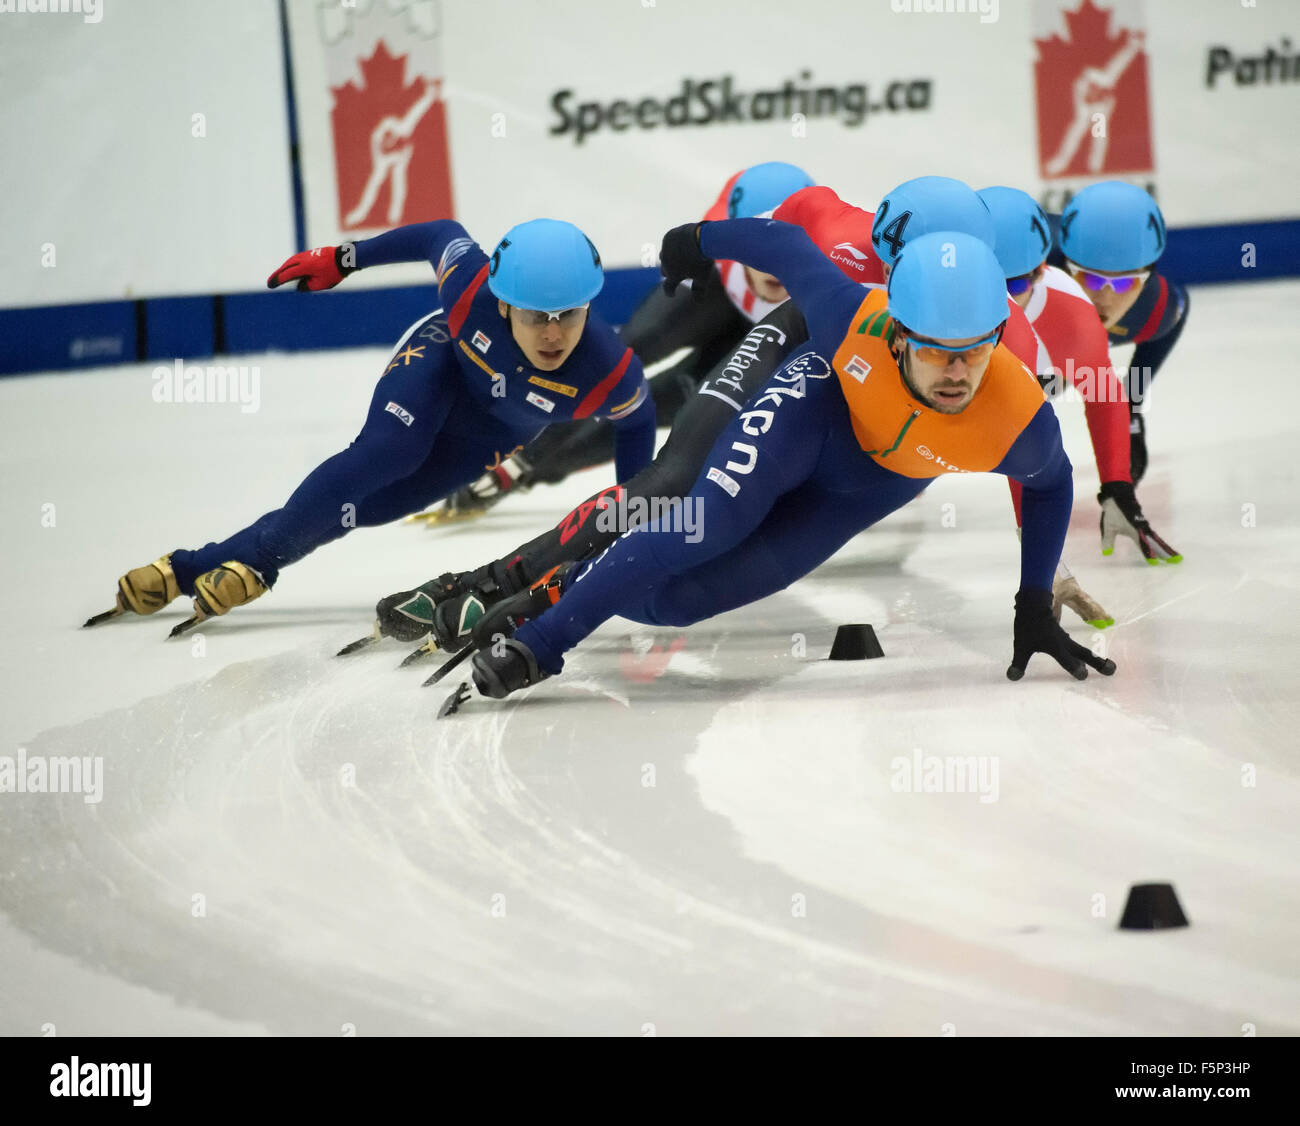 Toronto, Canada. 7 November 2015: ISU World Cup Short Track, Toronto -  leads Sjinkie Knelt (1) NED) competes in the men's 1500m final. Photo: Peter Llewellyn/Alamy Live News Stock Photo